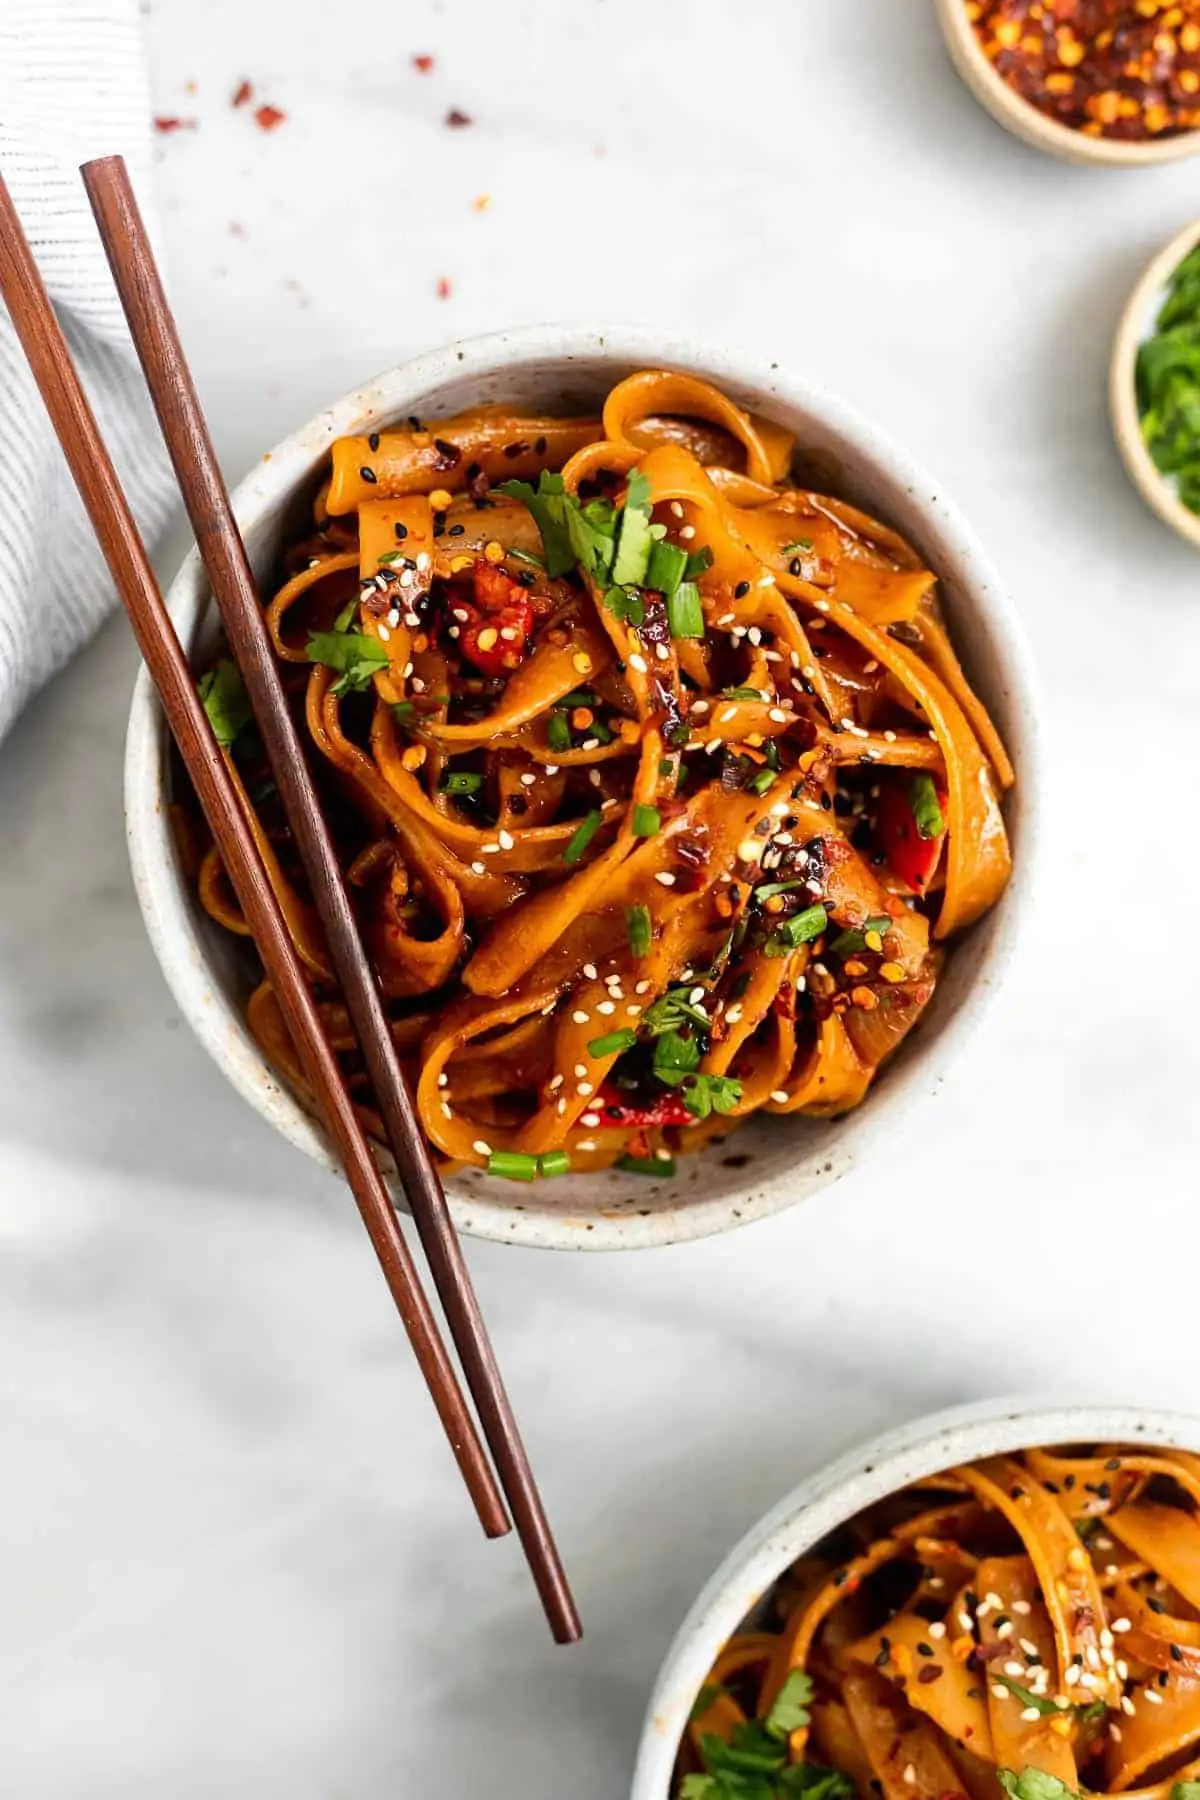 Spice Up Your Dinner Menu with Delicious Asian-Inspired Recipes - Discover Authentic Flavors!